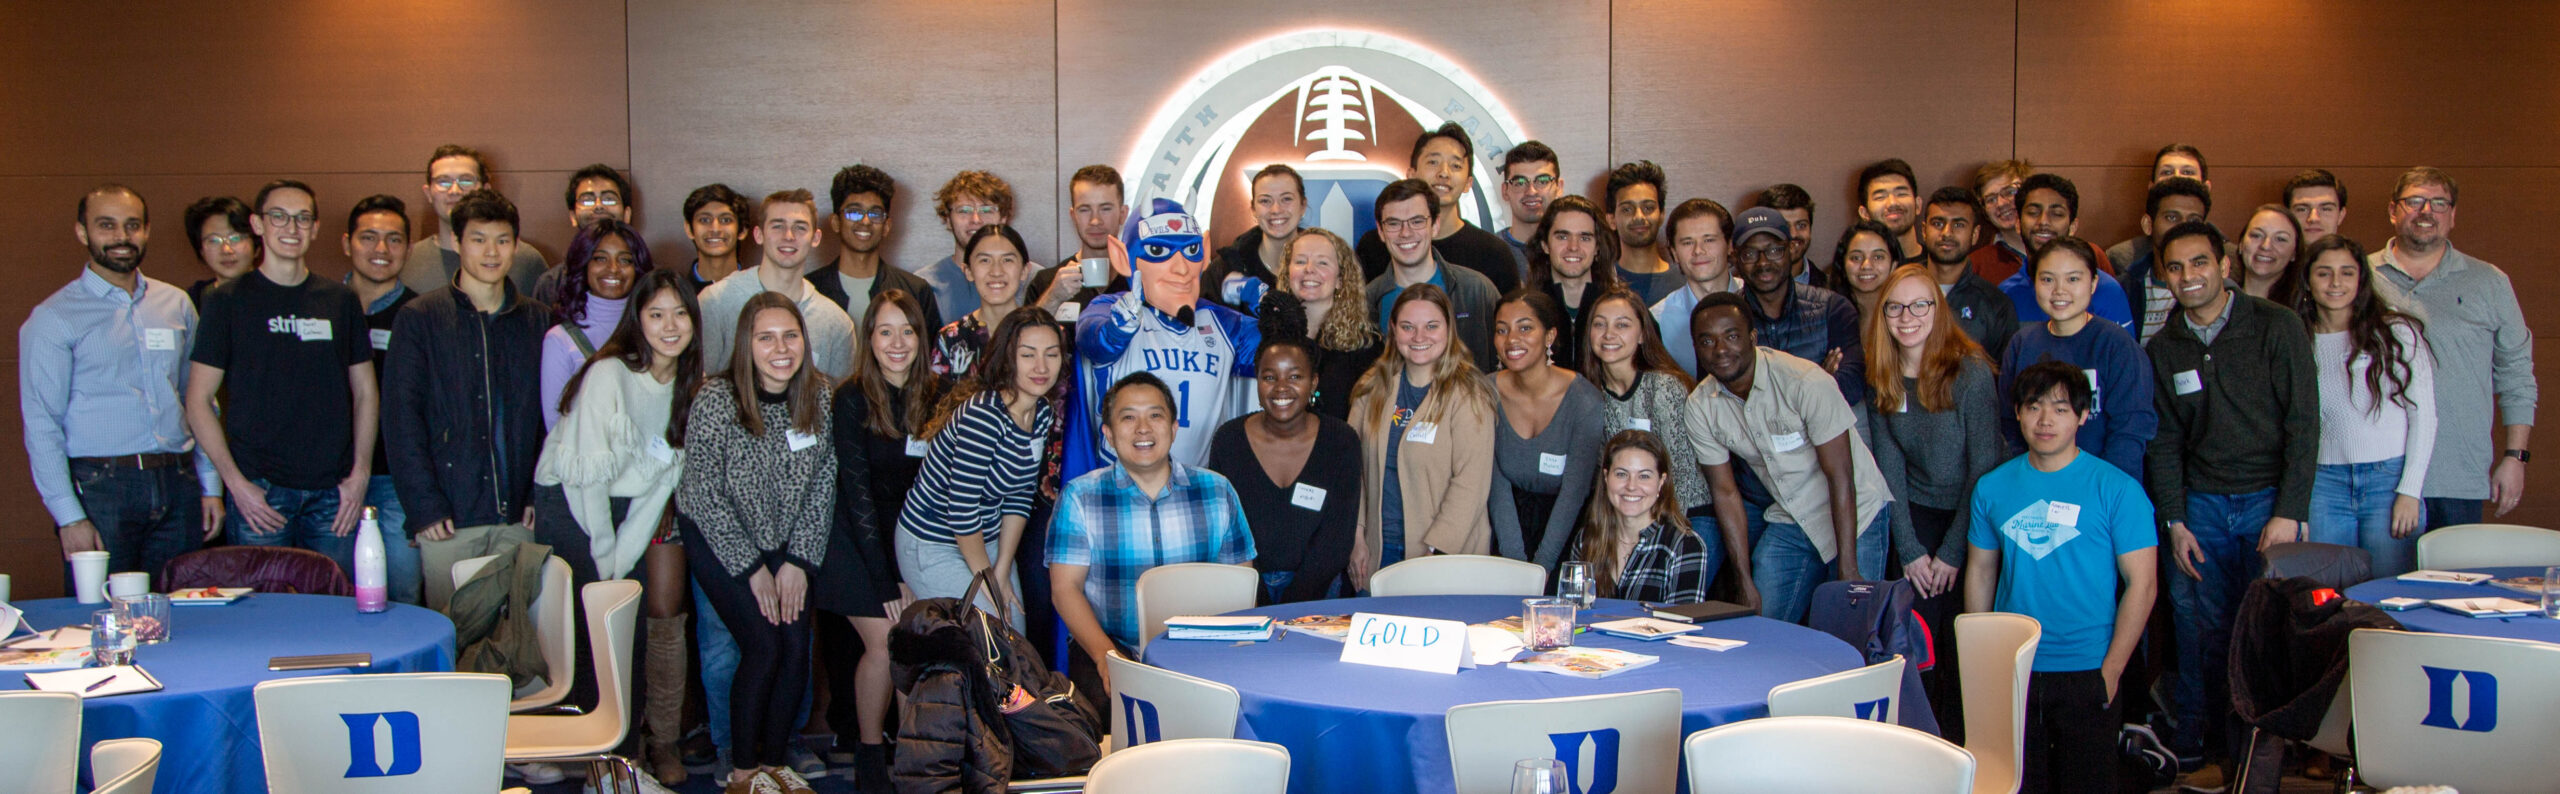 Students and staff at the Student Founders Program kick-off, Feb. 29, 2020.